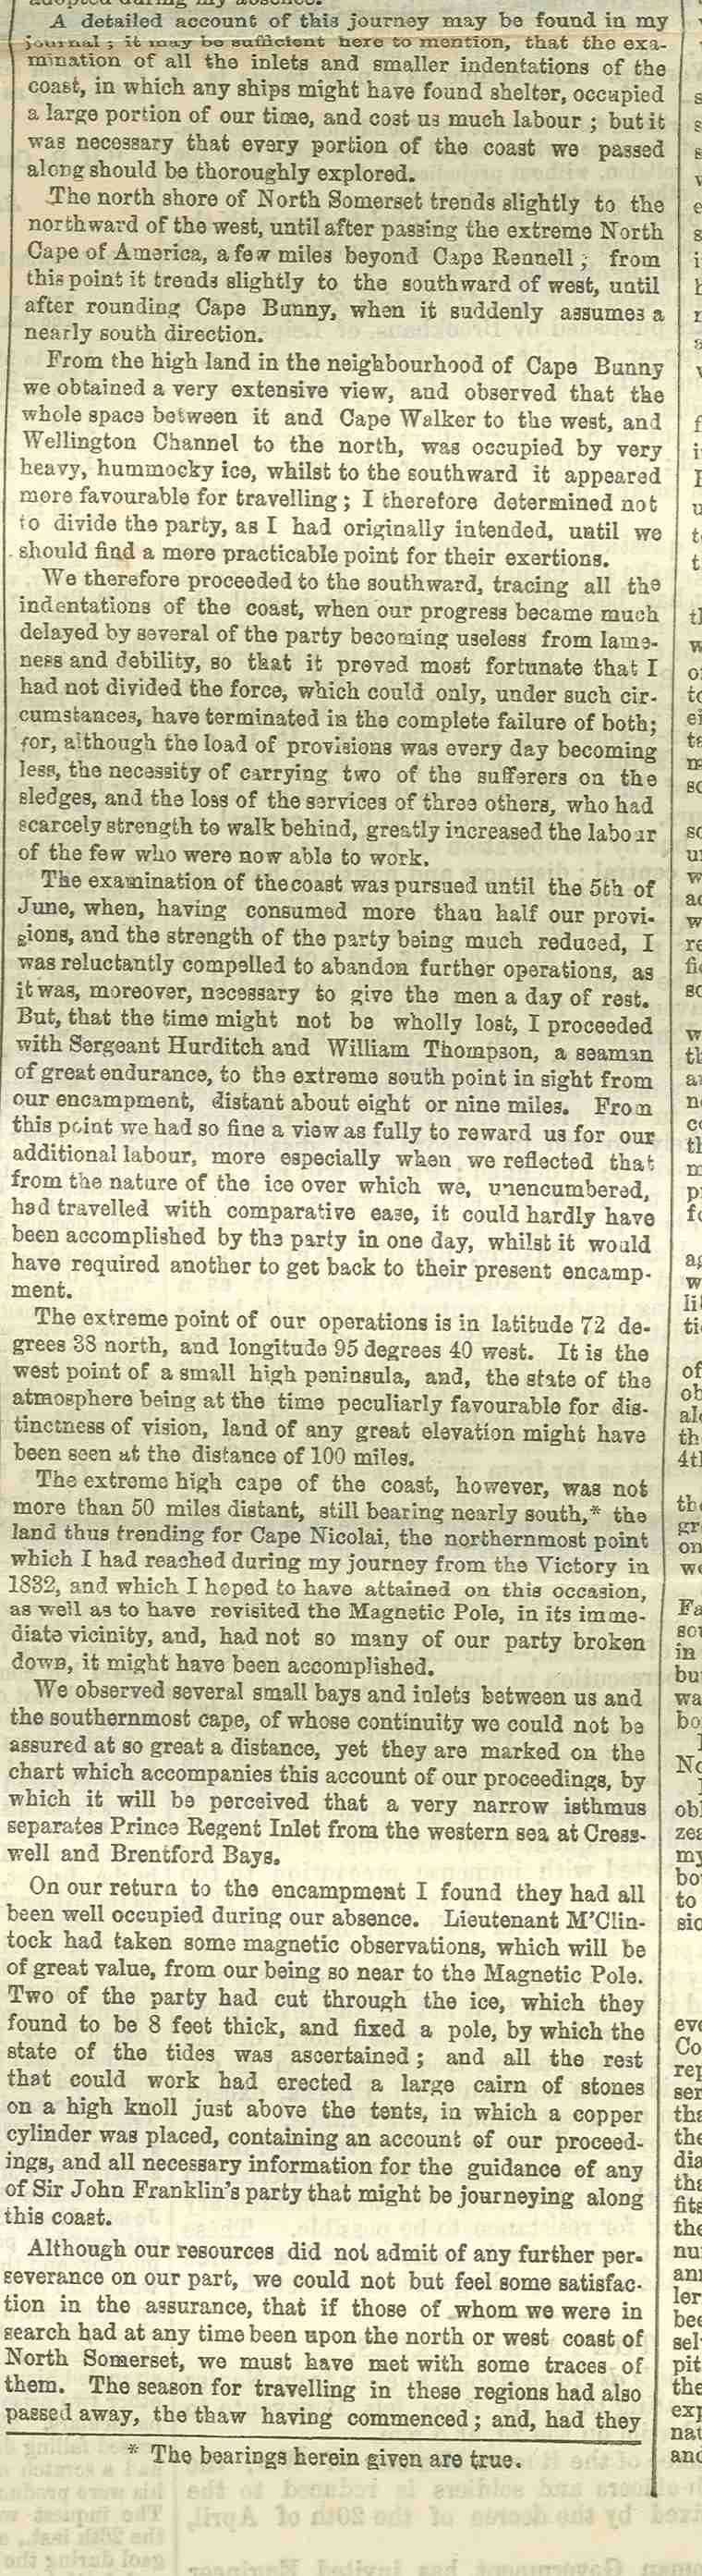 Clippings from The Times re: the search for the third Franklin Expedition